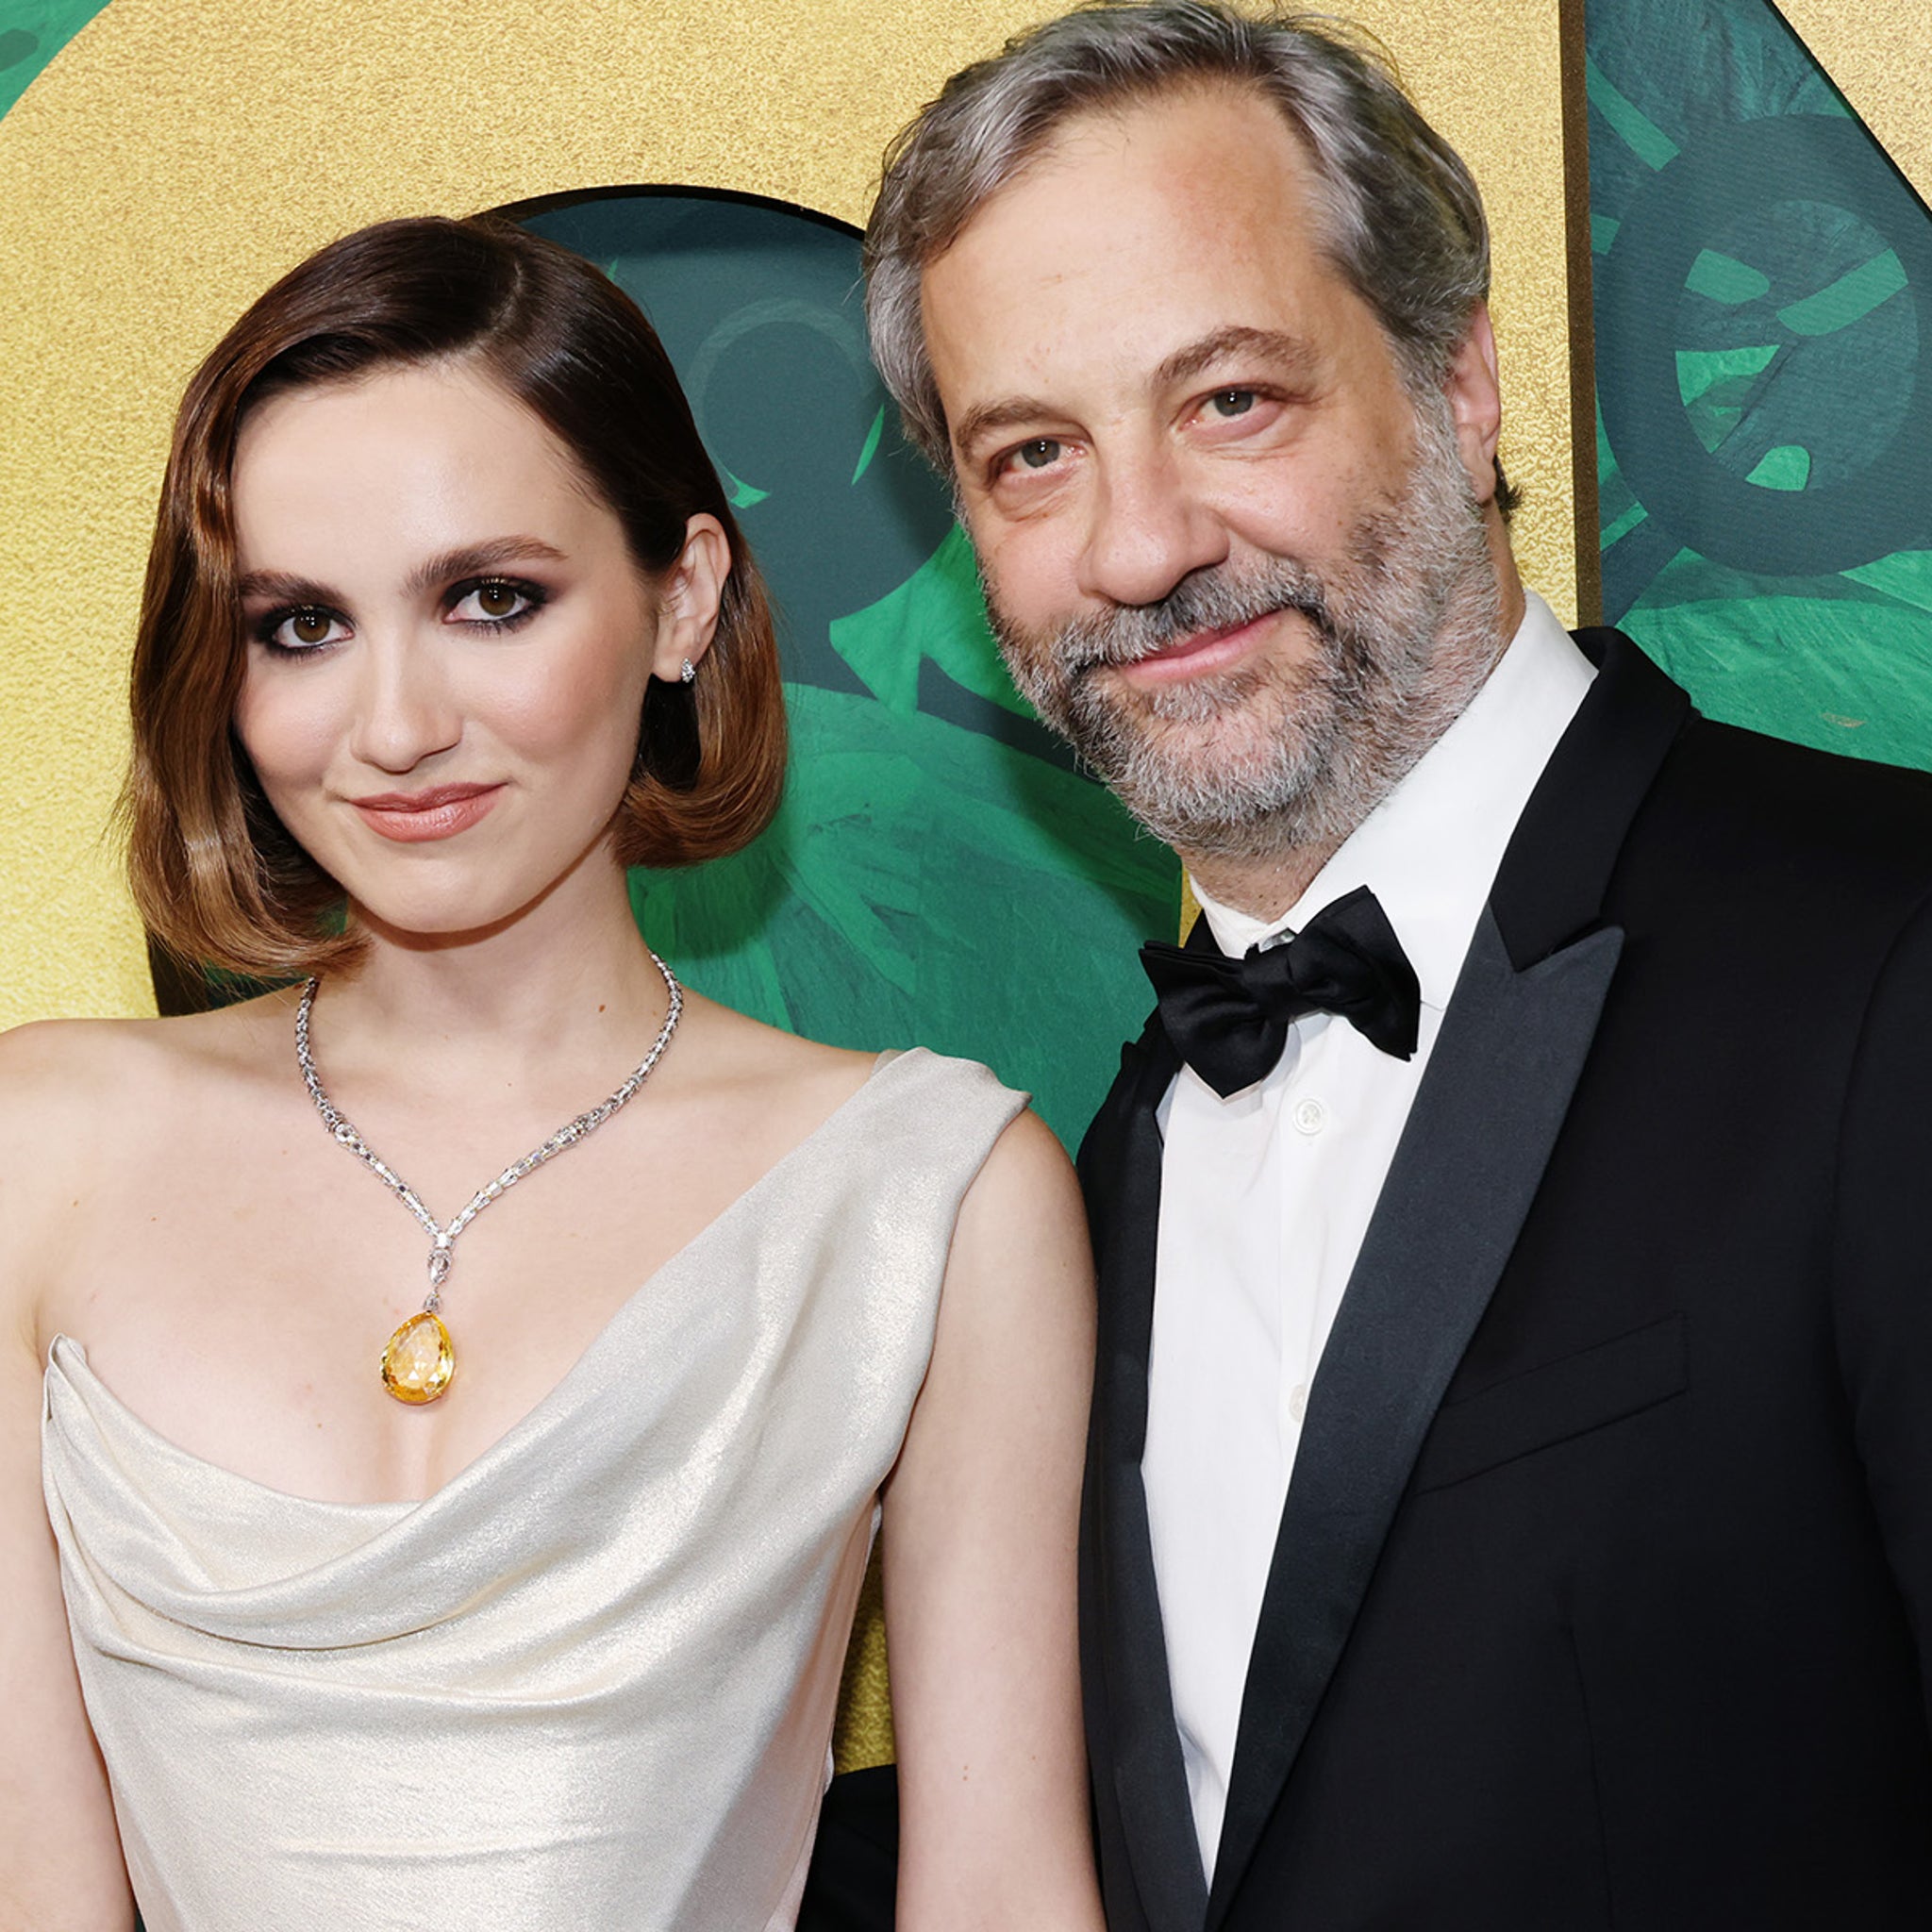 Maude Apatow on Euphoria and nepotism babies with Net-A-Porter